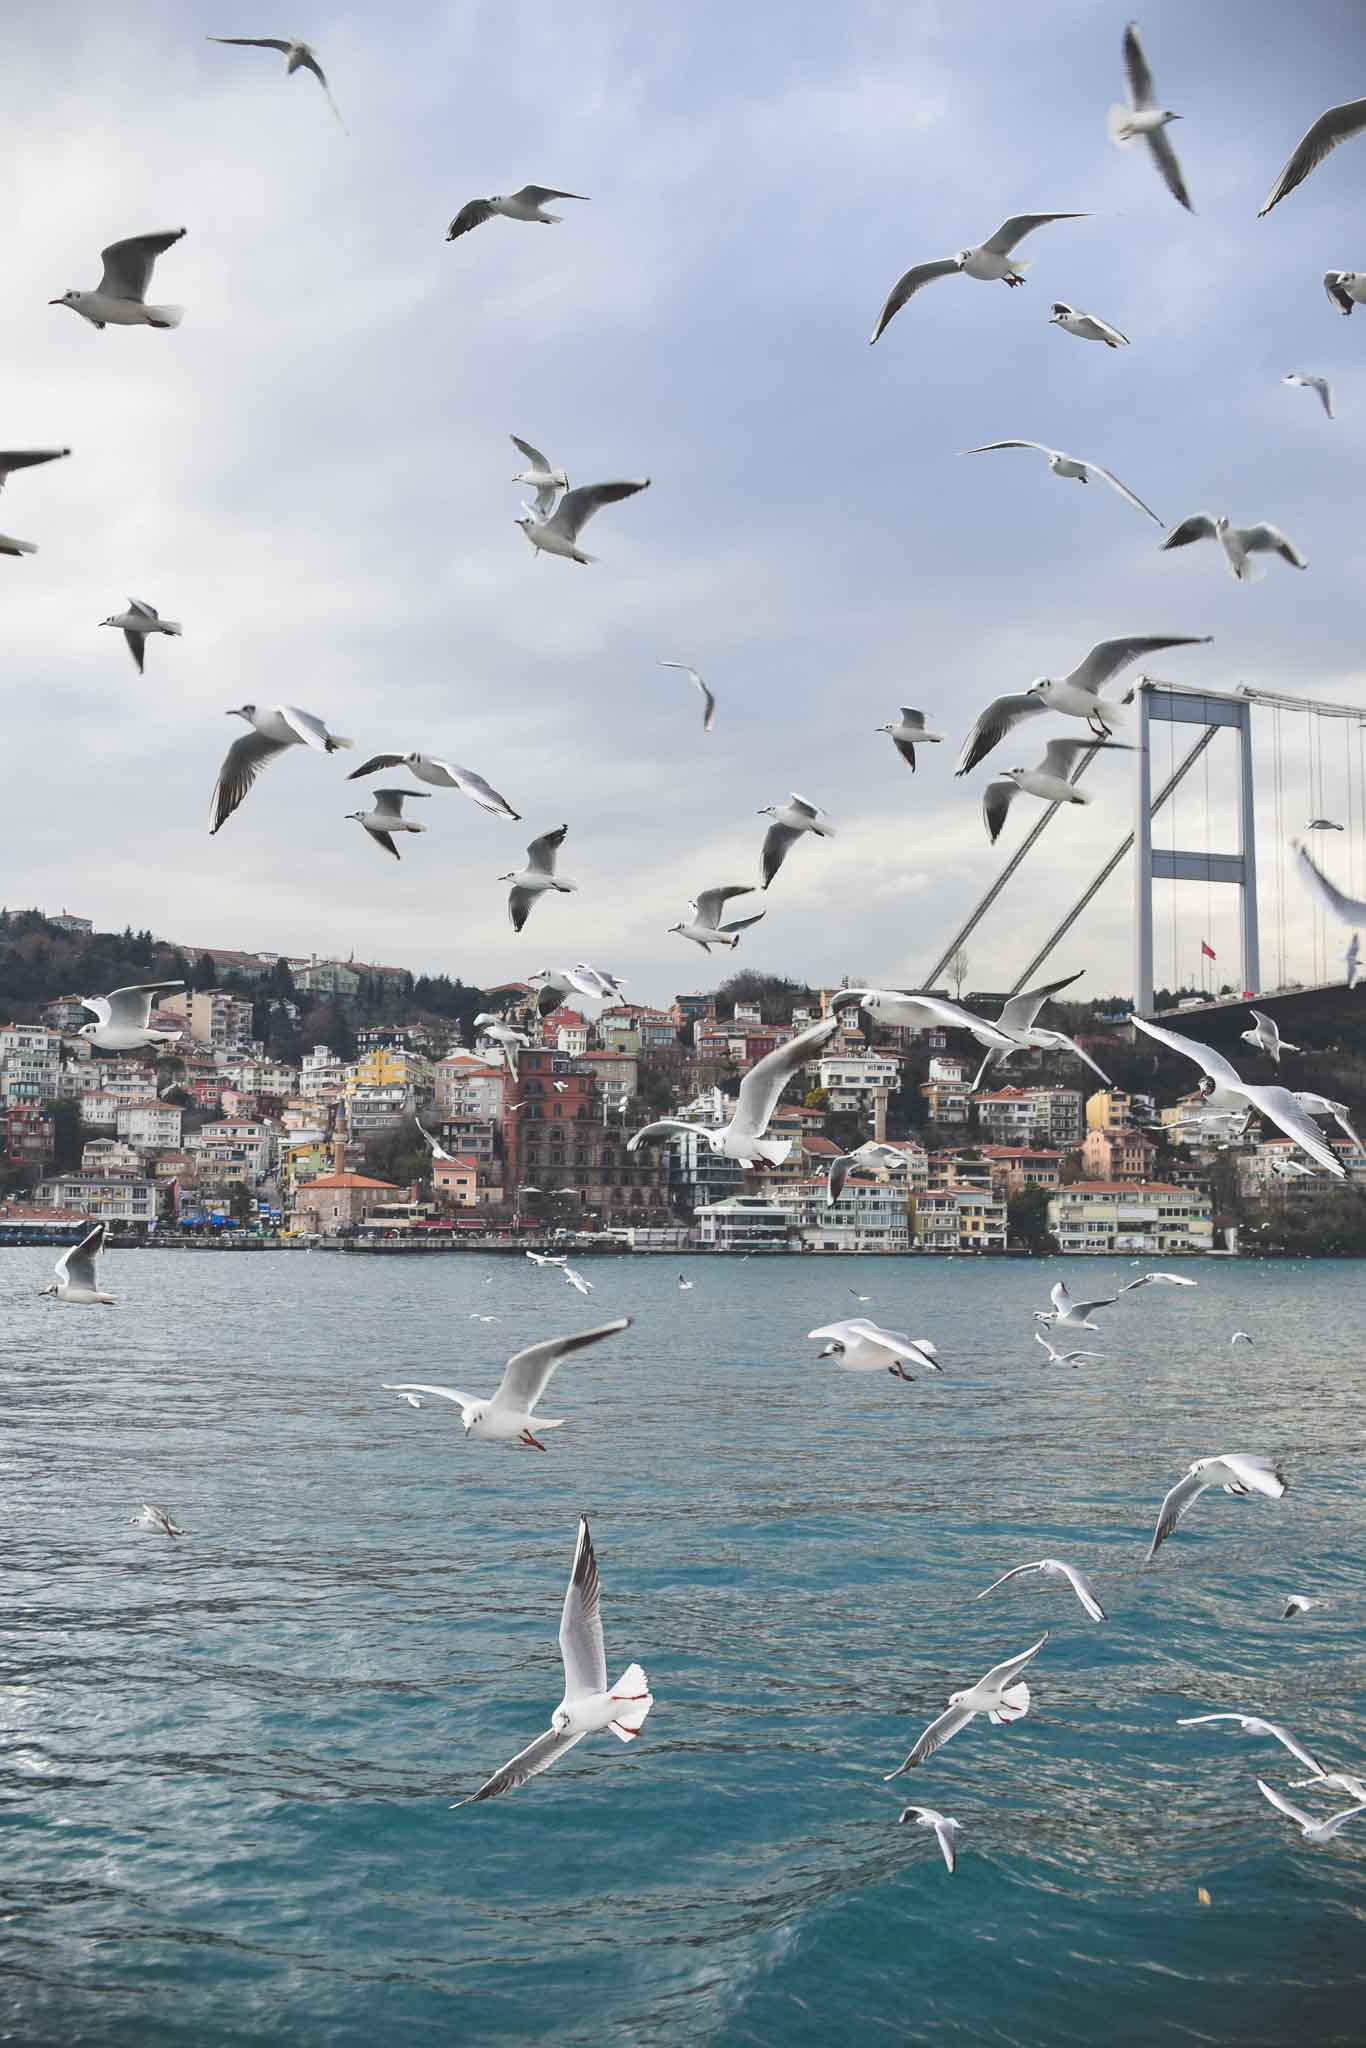 Many seagulls fly over the water of the Bosphorus strait in Istanbul, Turkey with color houses on the hill in the background. Destination photography by Paige Gribb